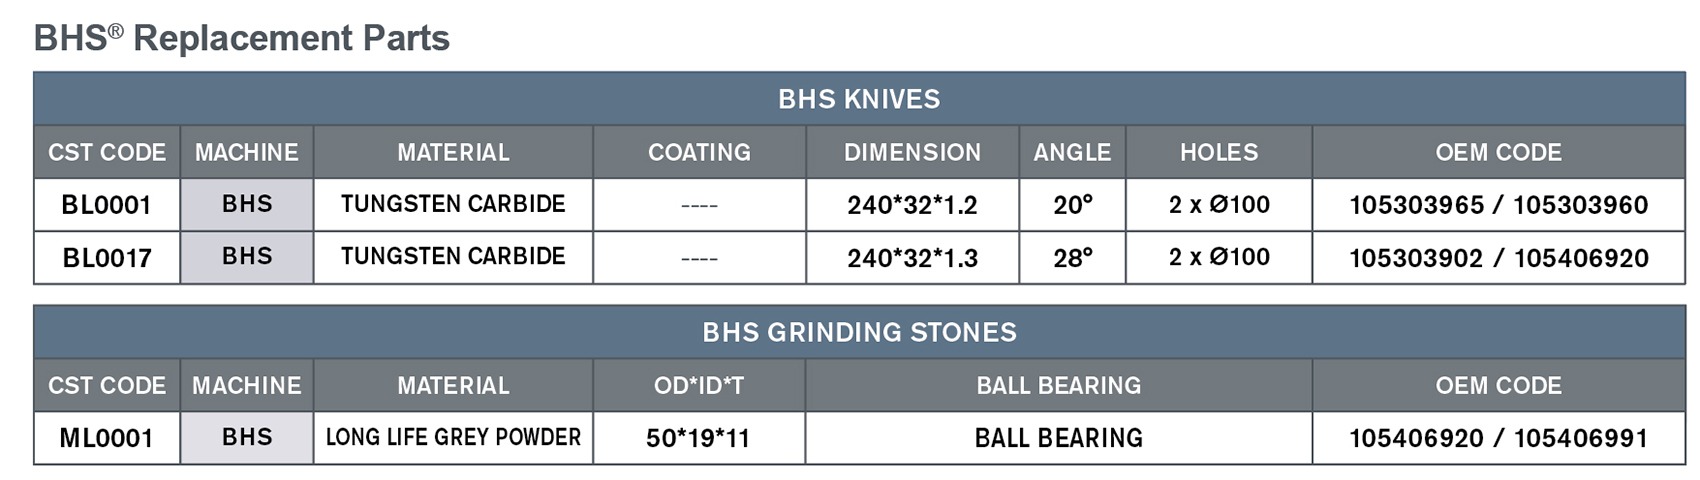 BHS Replacements Parts Information Chart